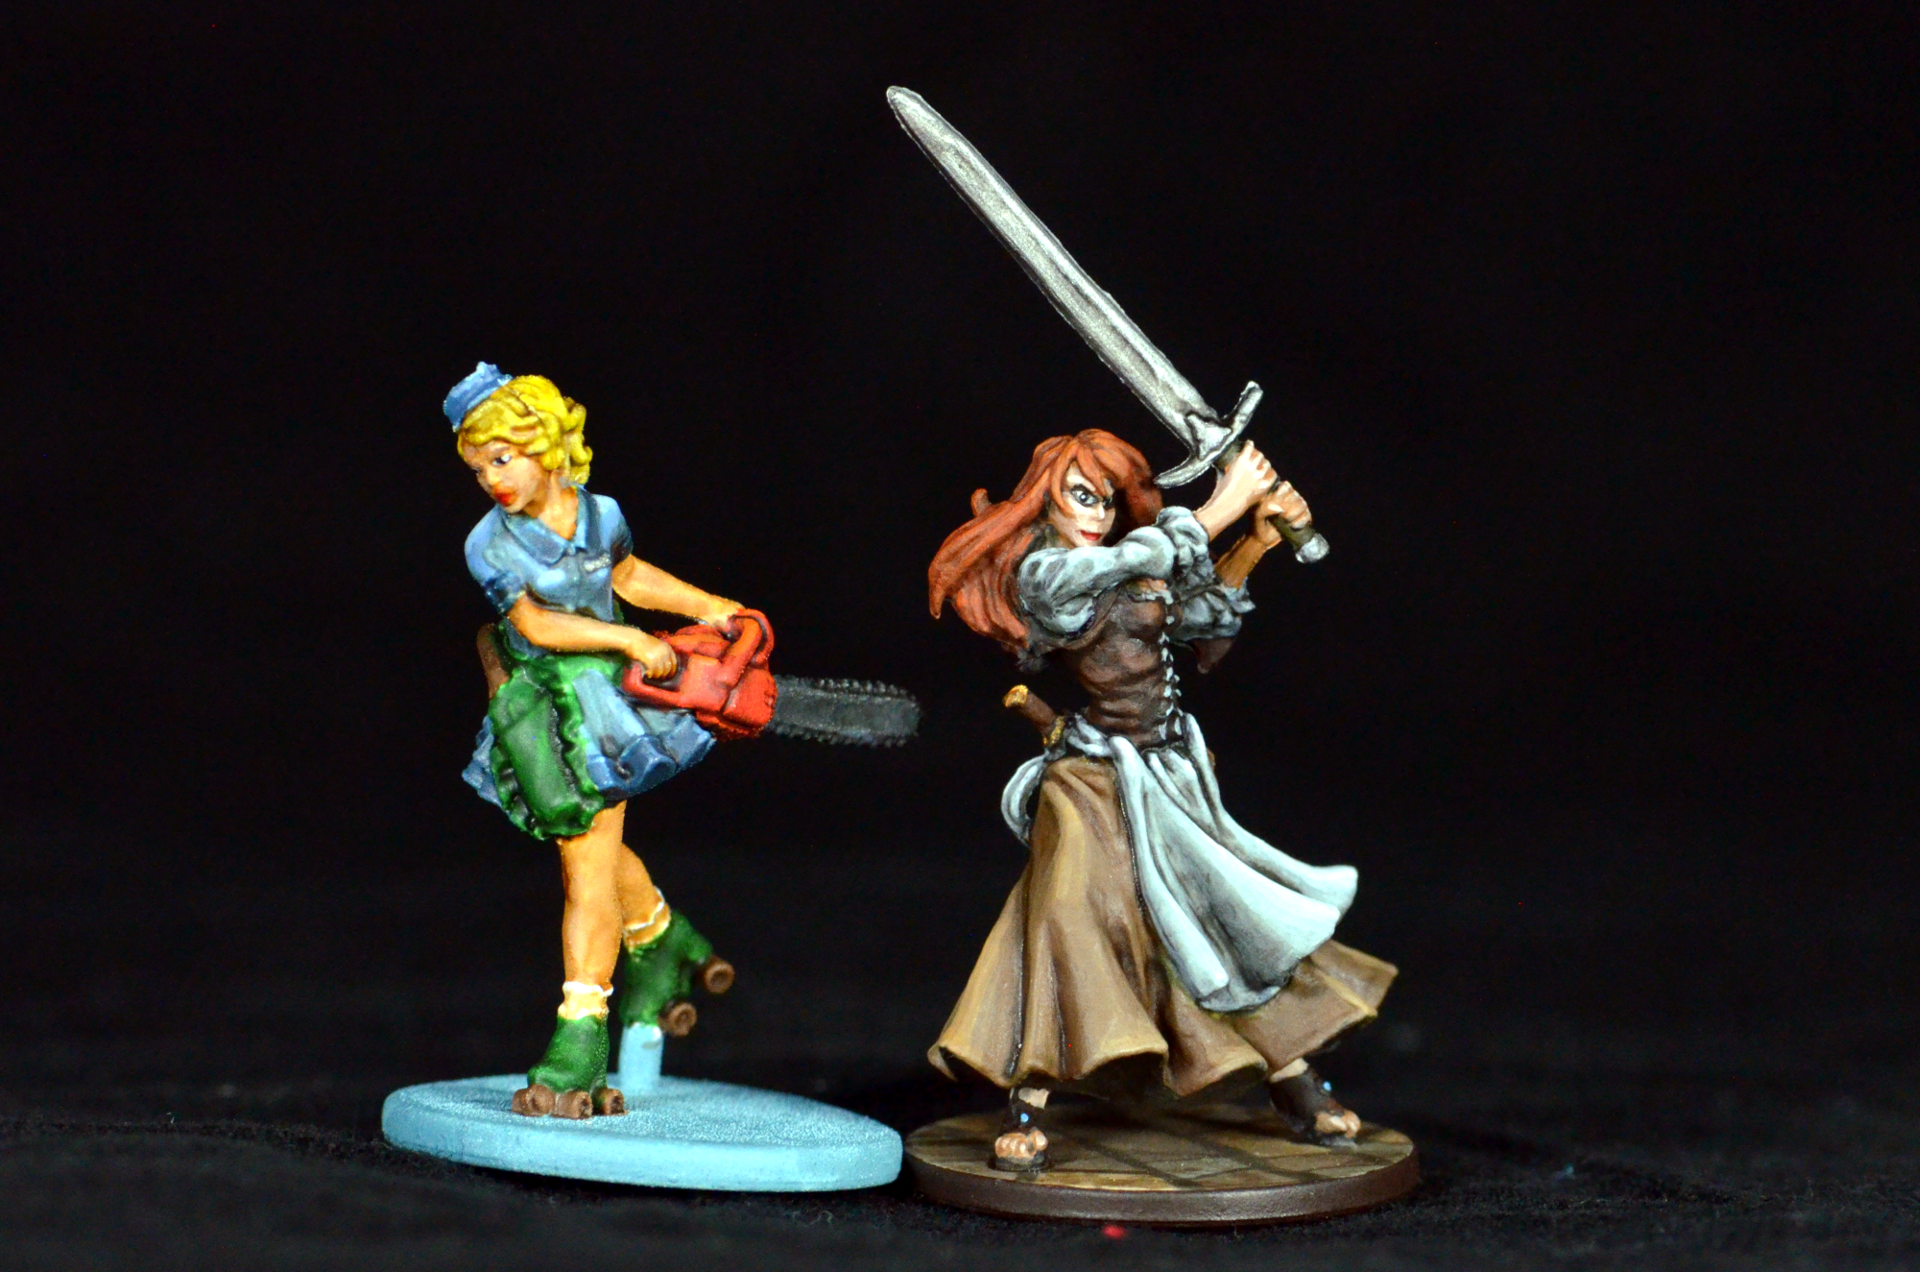 Wanda from Zombicide and Nelly from Zombicide: Black Plague